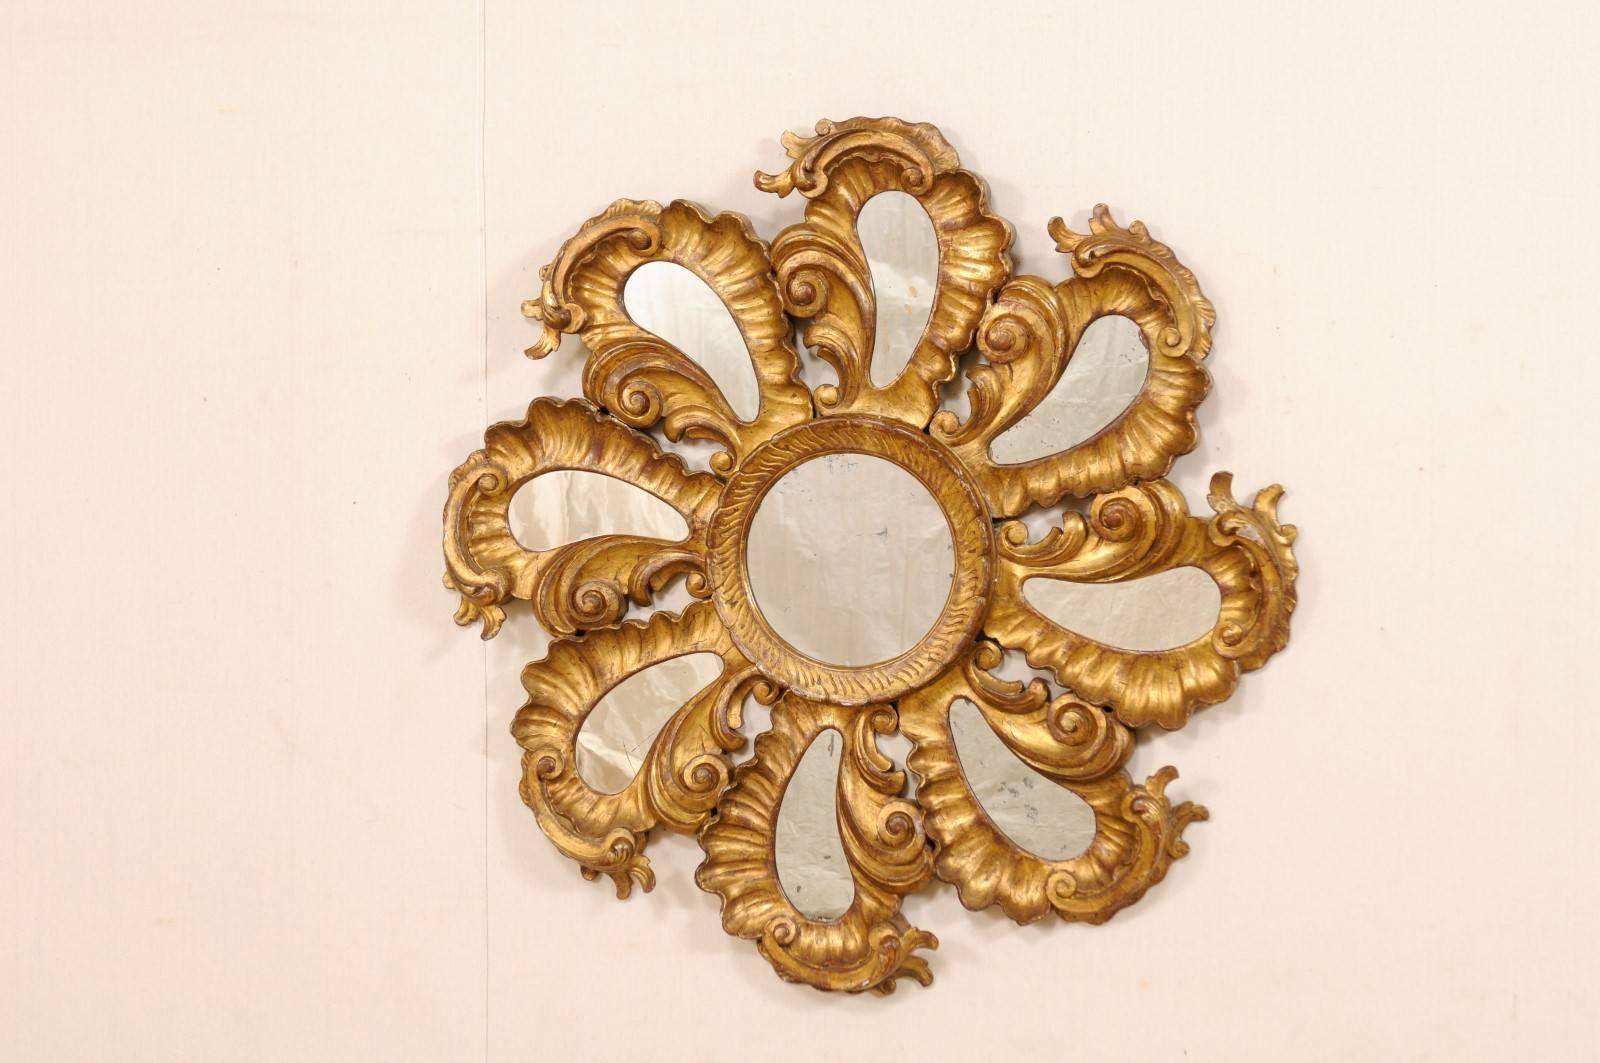 A vintage Italian good gilt and carved wood flower-shaped mirror. This spectacular gilded Italian mirror is comprised of circular-shaped center mirror which is surrounded by whirling, and richly carved petal-shaped extensions, each with mirrors at